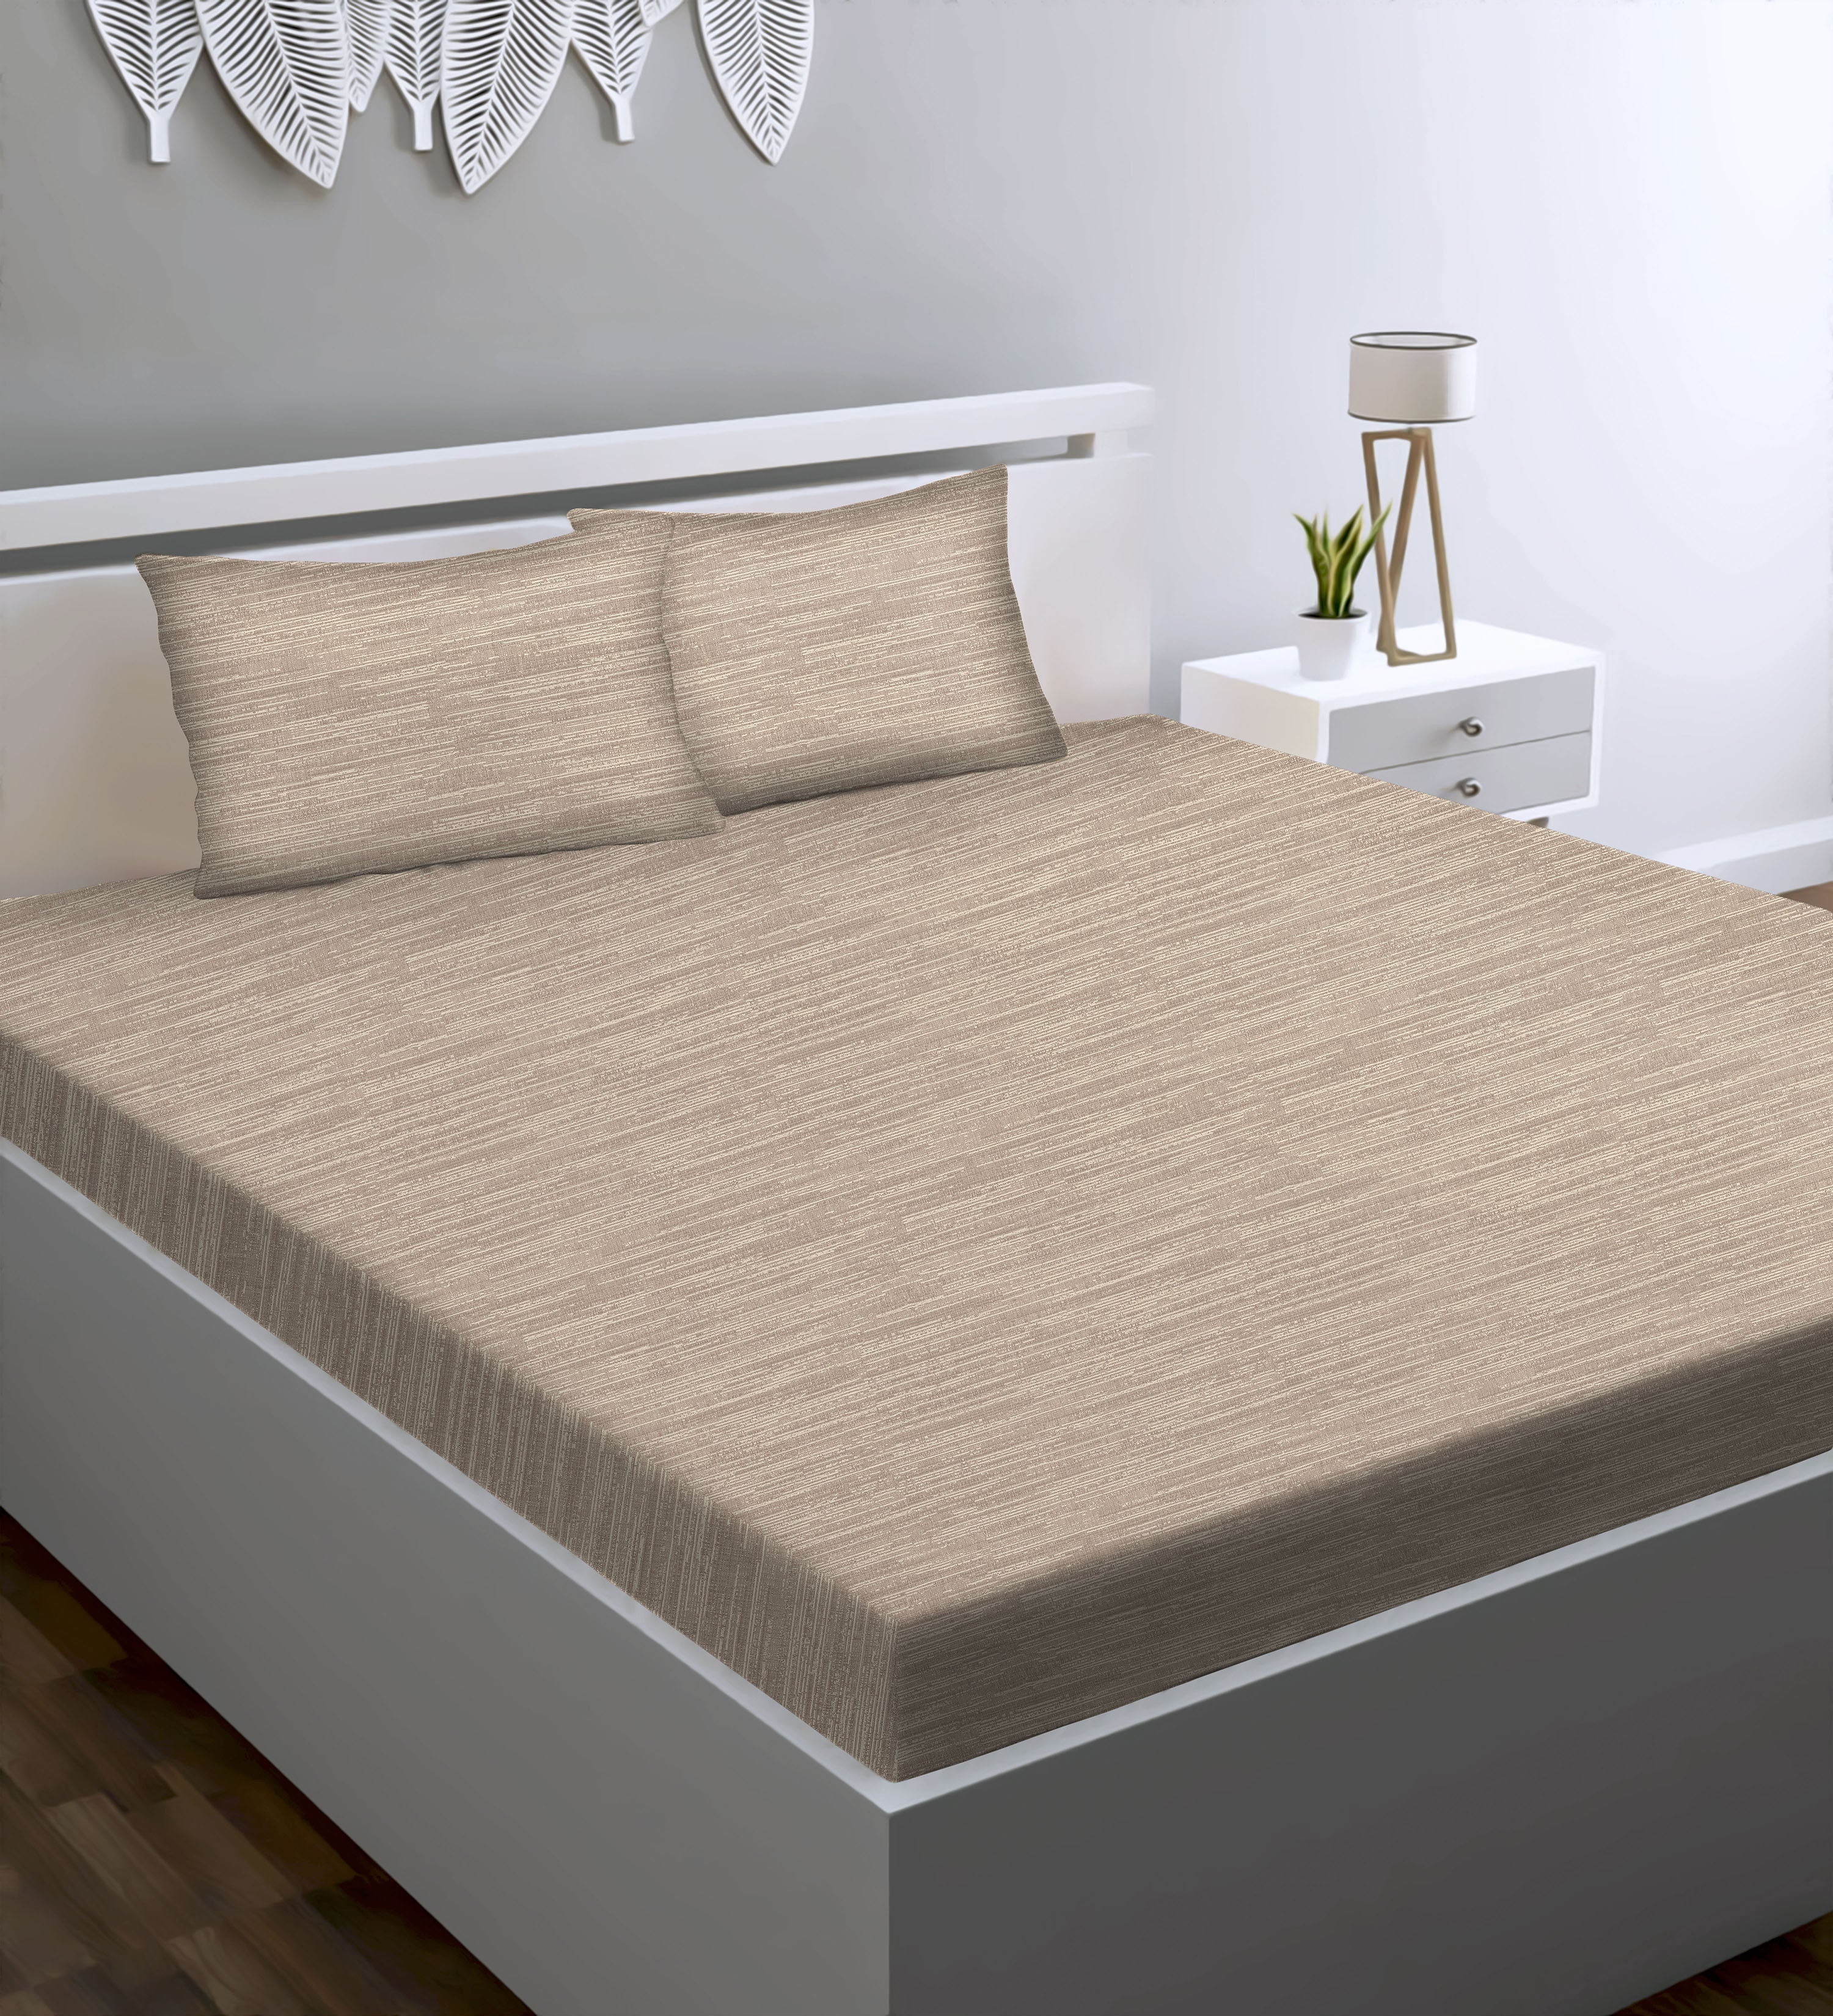 Petra Stone Bedcover for Double Bed with 2 PillowCovers King Size (104" X 90")